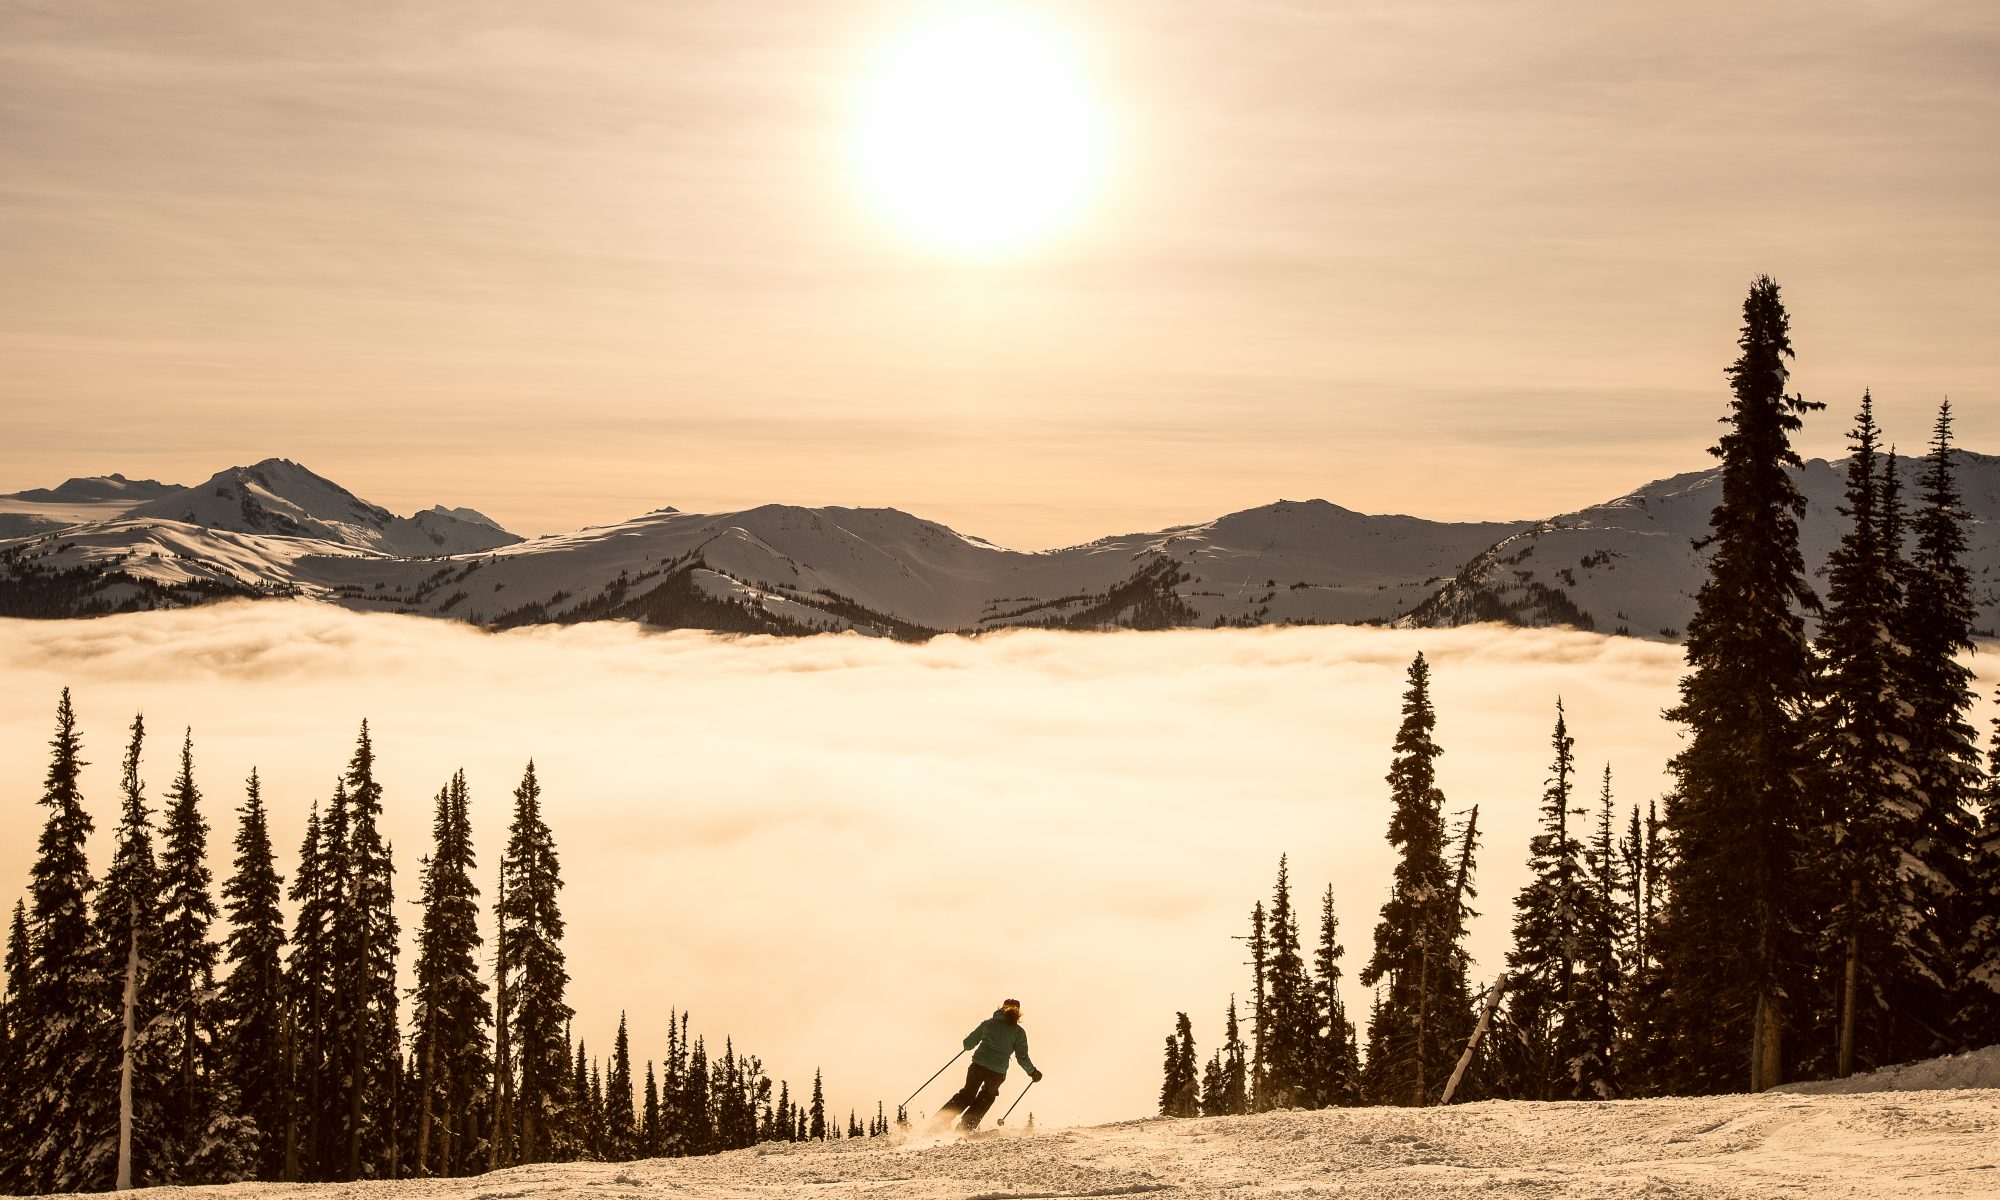 Whistler- The effect that looks like a sea of clouds- Photo by Paul Morrison - Whistler Blackcomb - Vail Resorts. New investments in Whistler Blackcomb to enhance the guest experience will be ready for the 2018-19 ski season